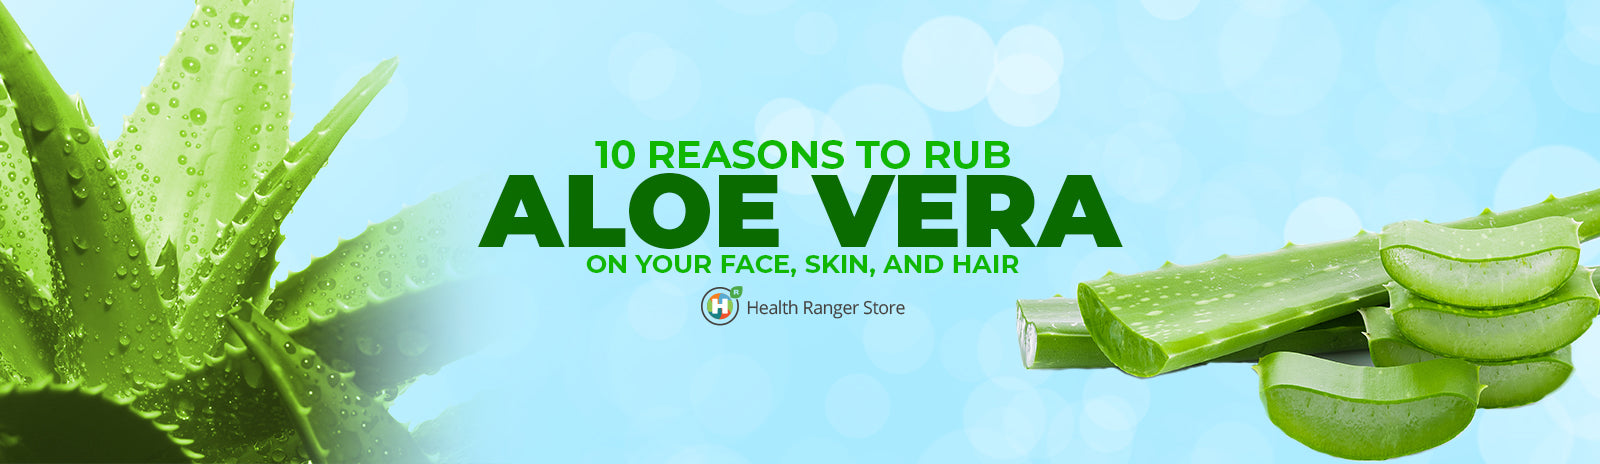 10 Reasons to rub aloe vera on your face, skin, and hair